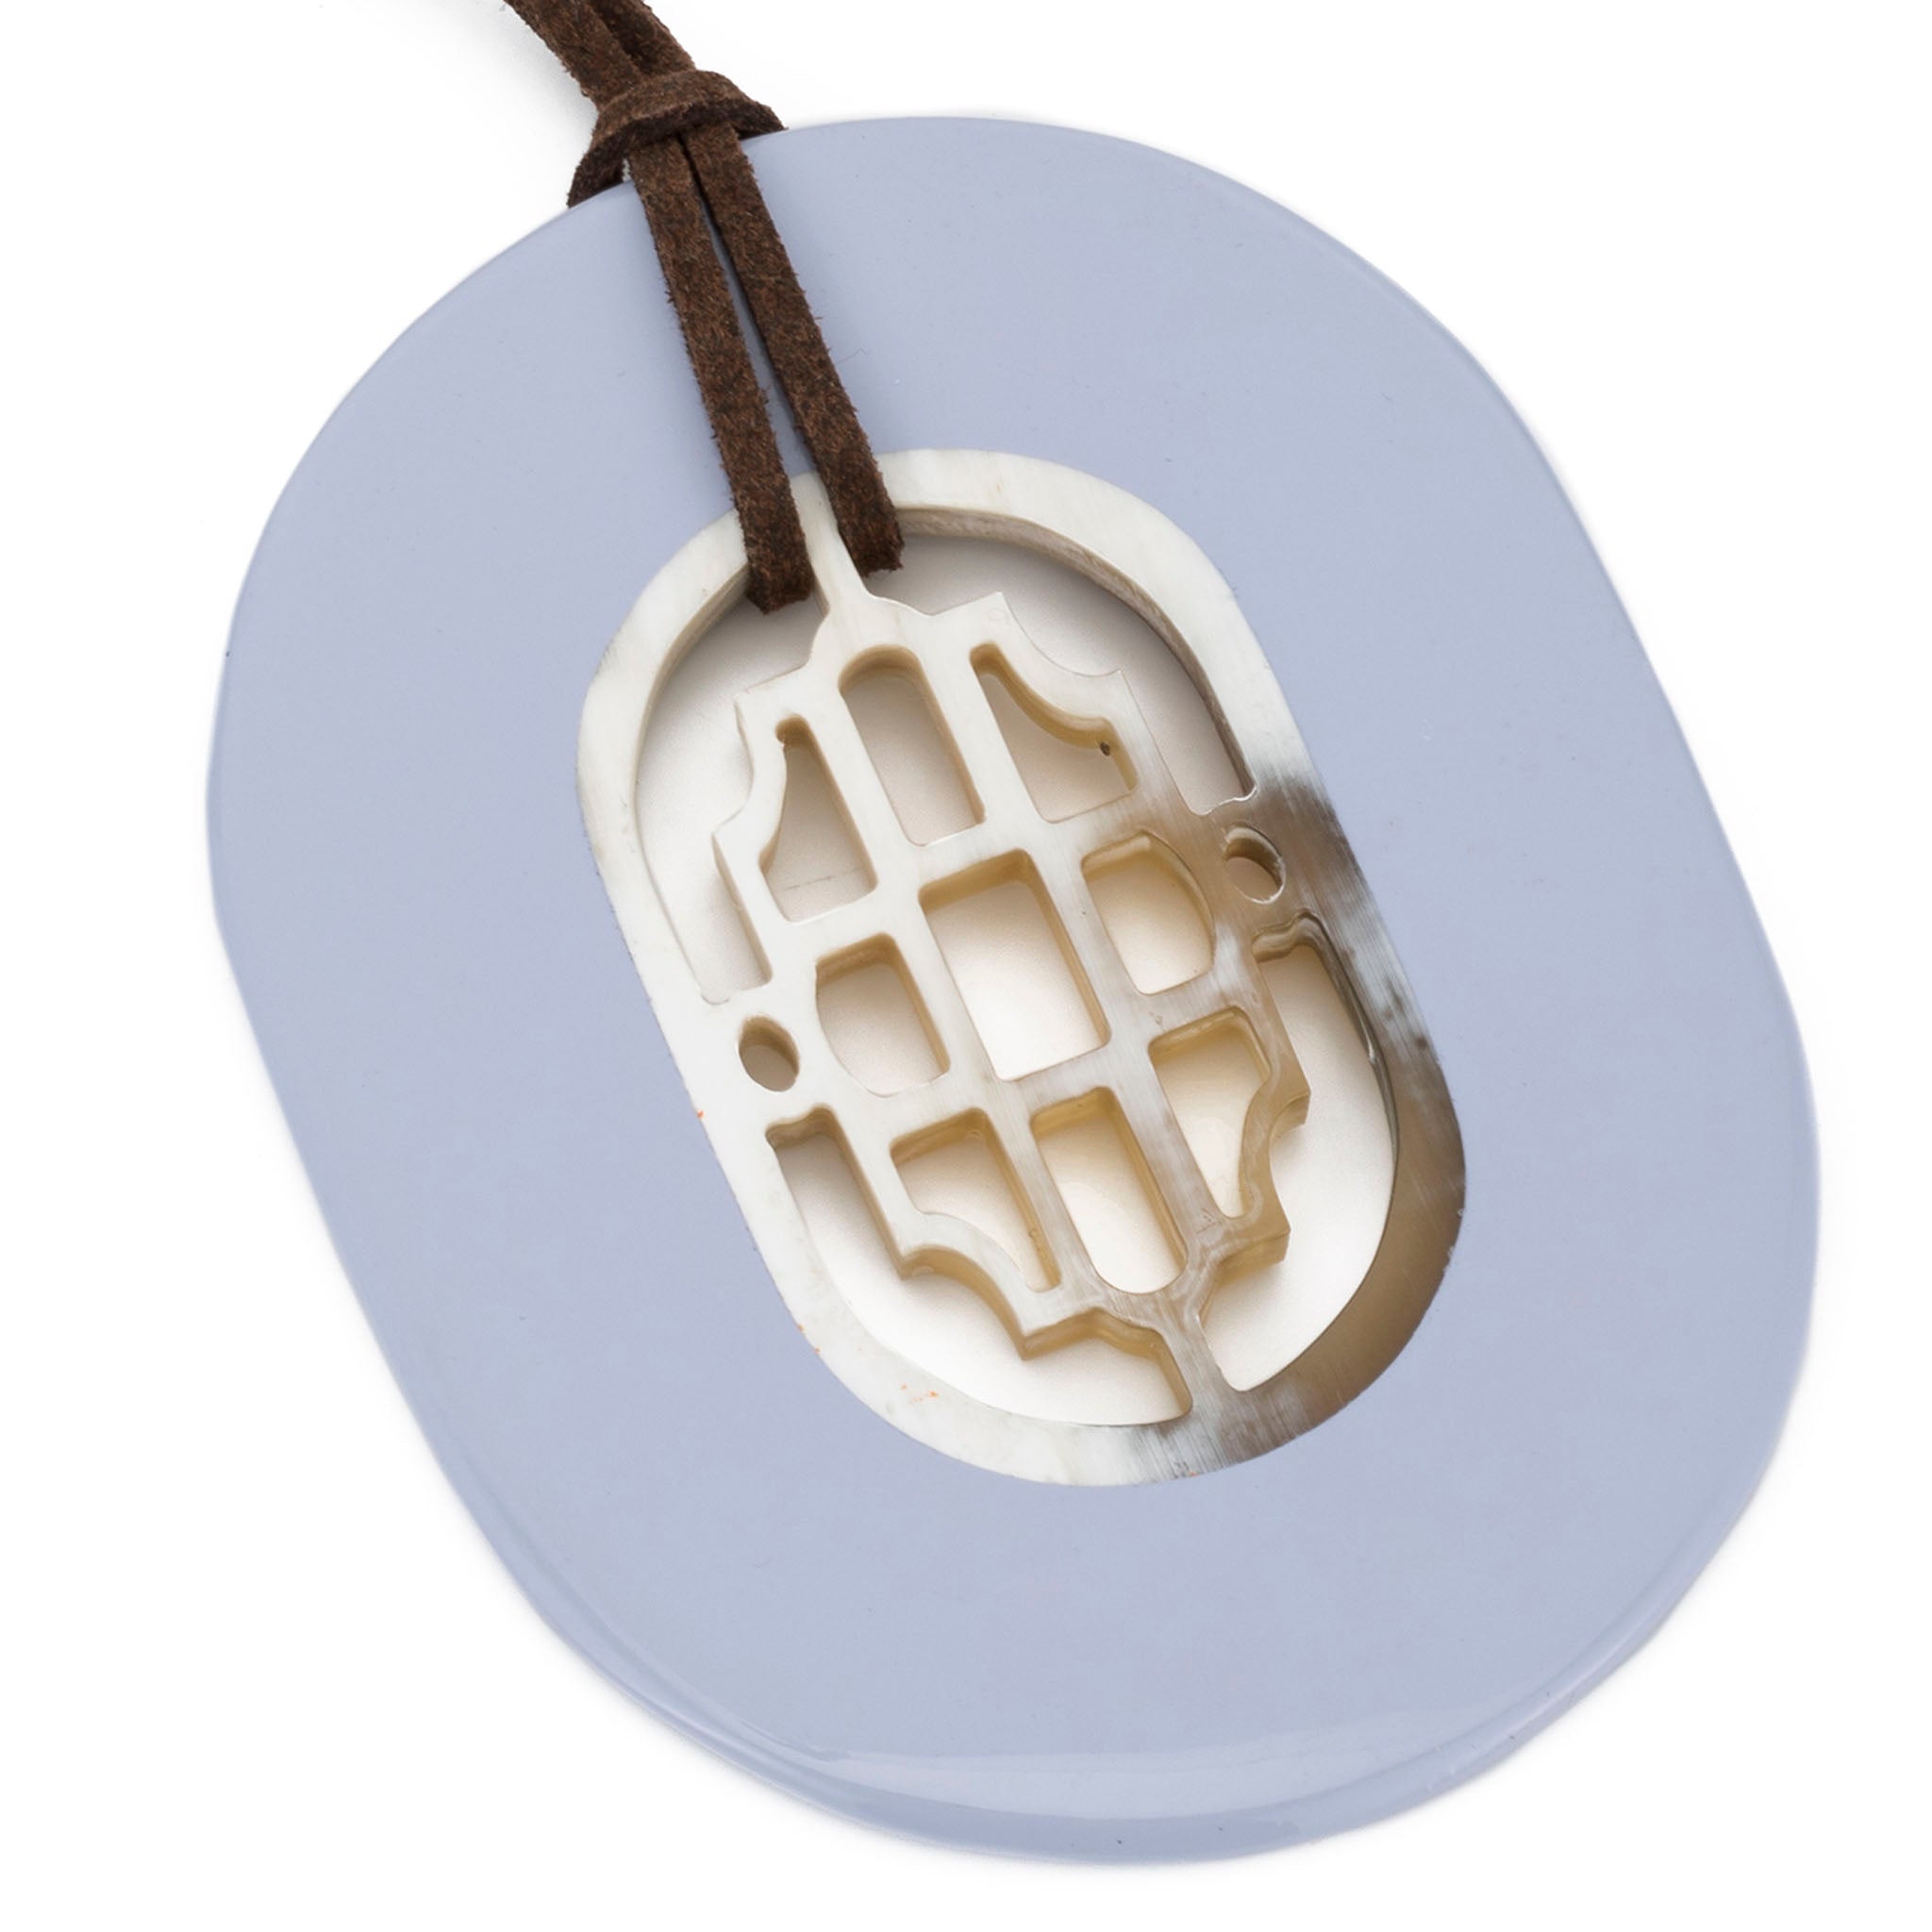 Oval Buffalo Pendant Carved Center Periwinkle Lacquer Frame Close View - Vivo Direct